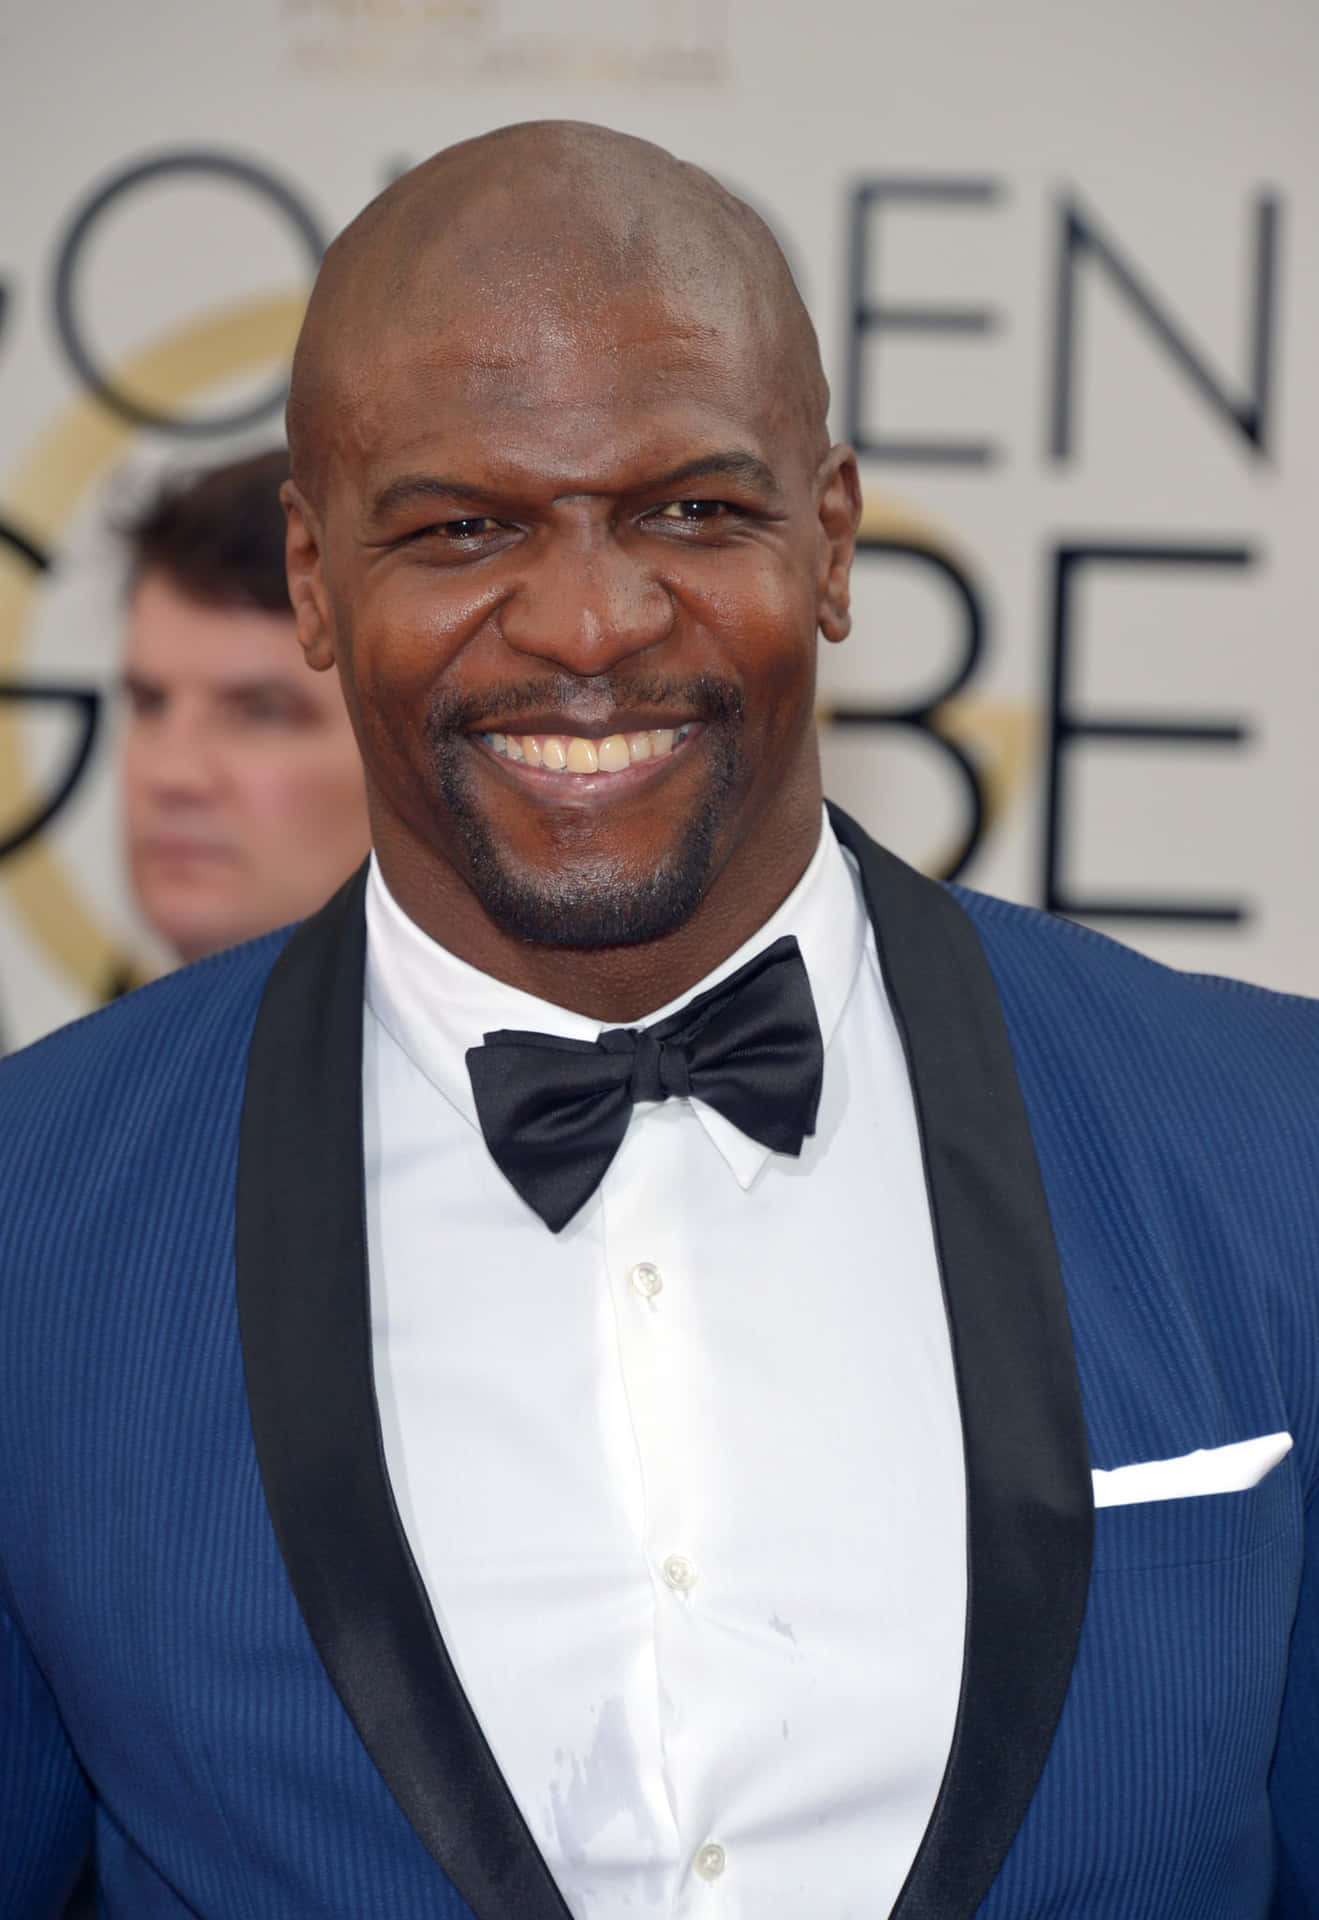 Terry Crews Uses His Muscles To Bring Smiles Wallpaper